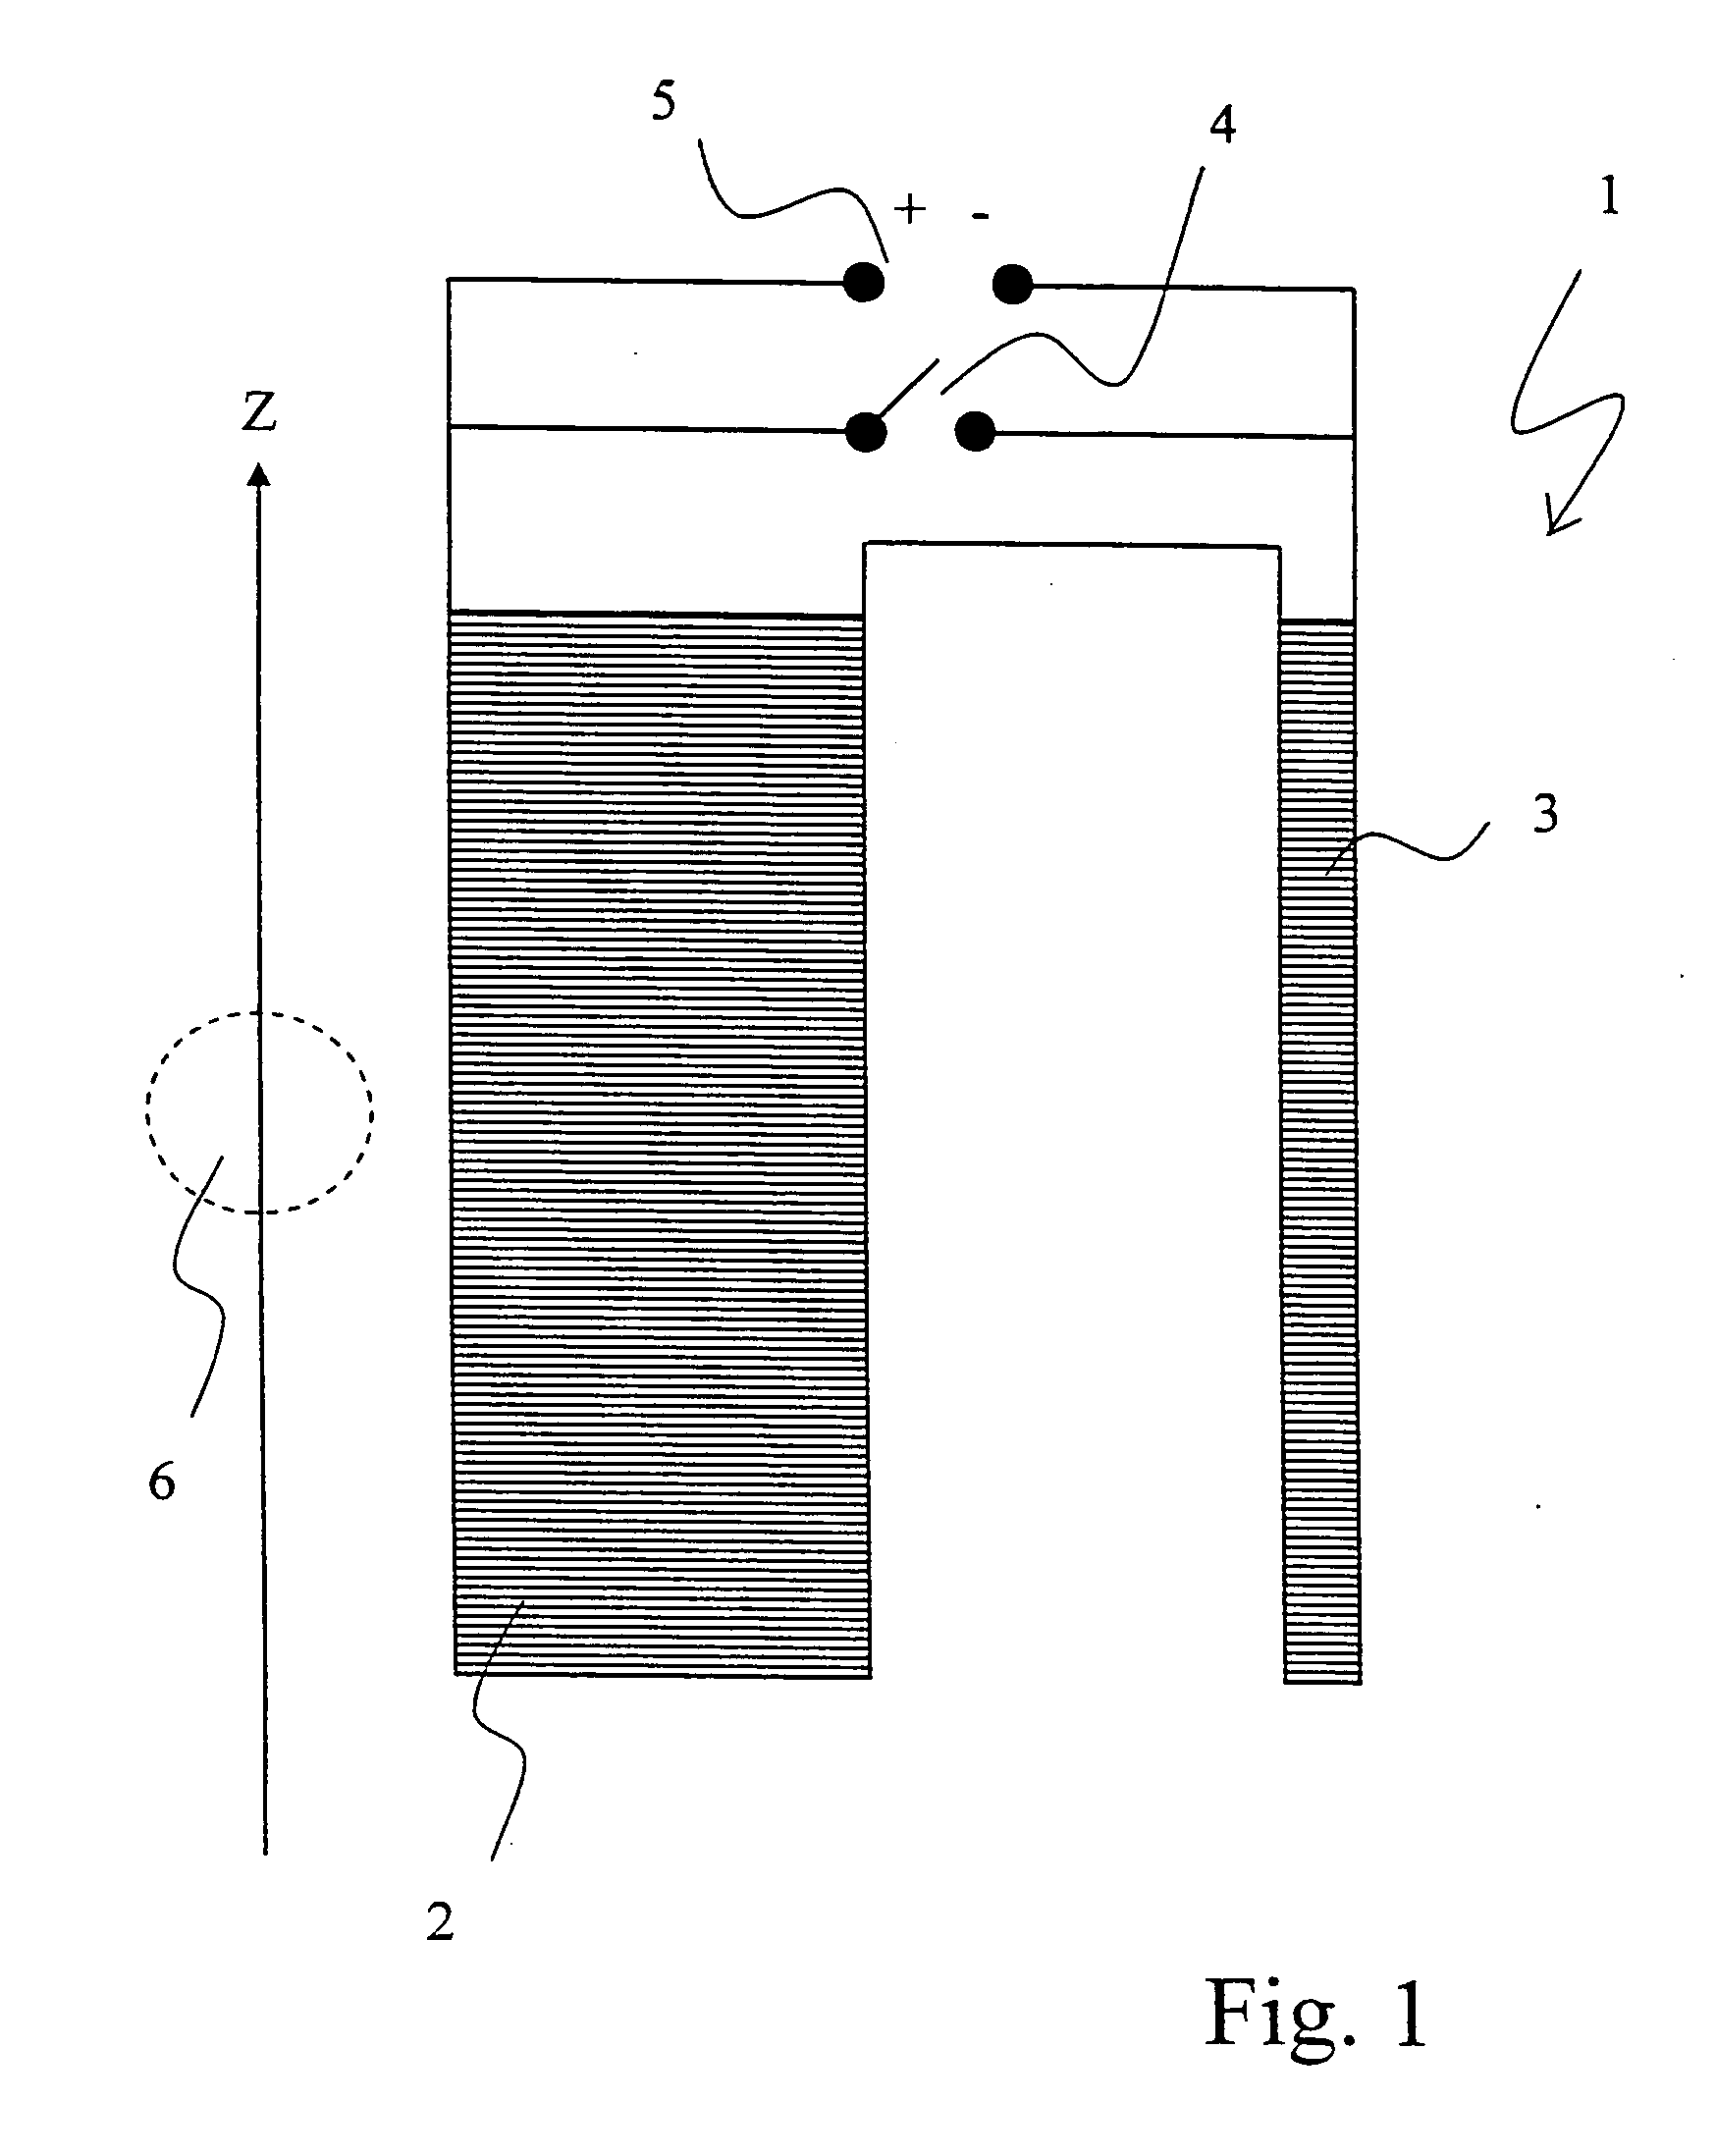 Method for testing a superconductor under increased current load in a series-produced and actively shielded superconducting nmr magnet